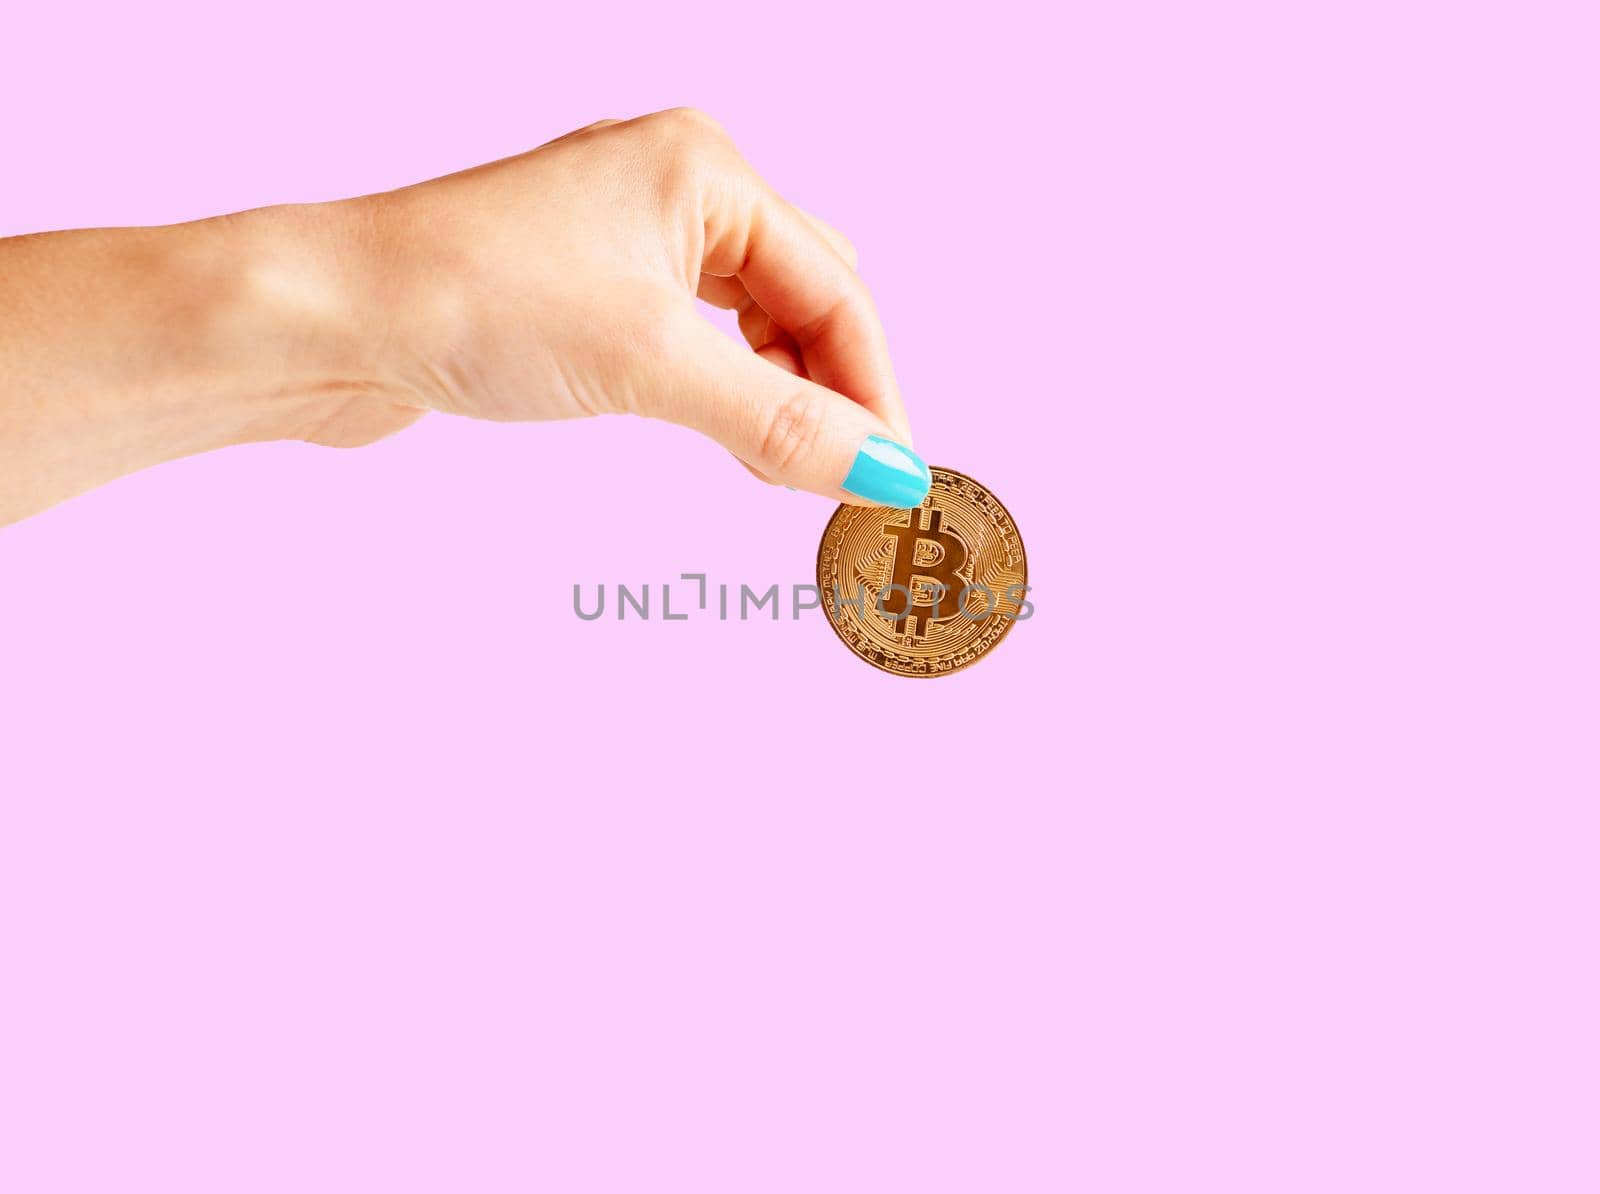 Woman’s hand holding gold coin bitcoin on a pink background, symbol of virtual money.